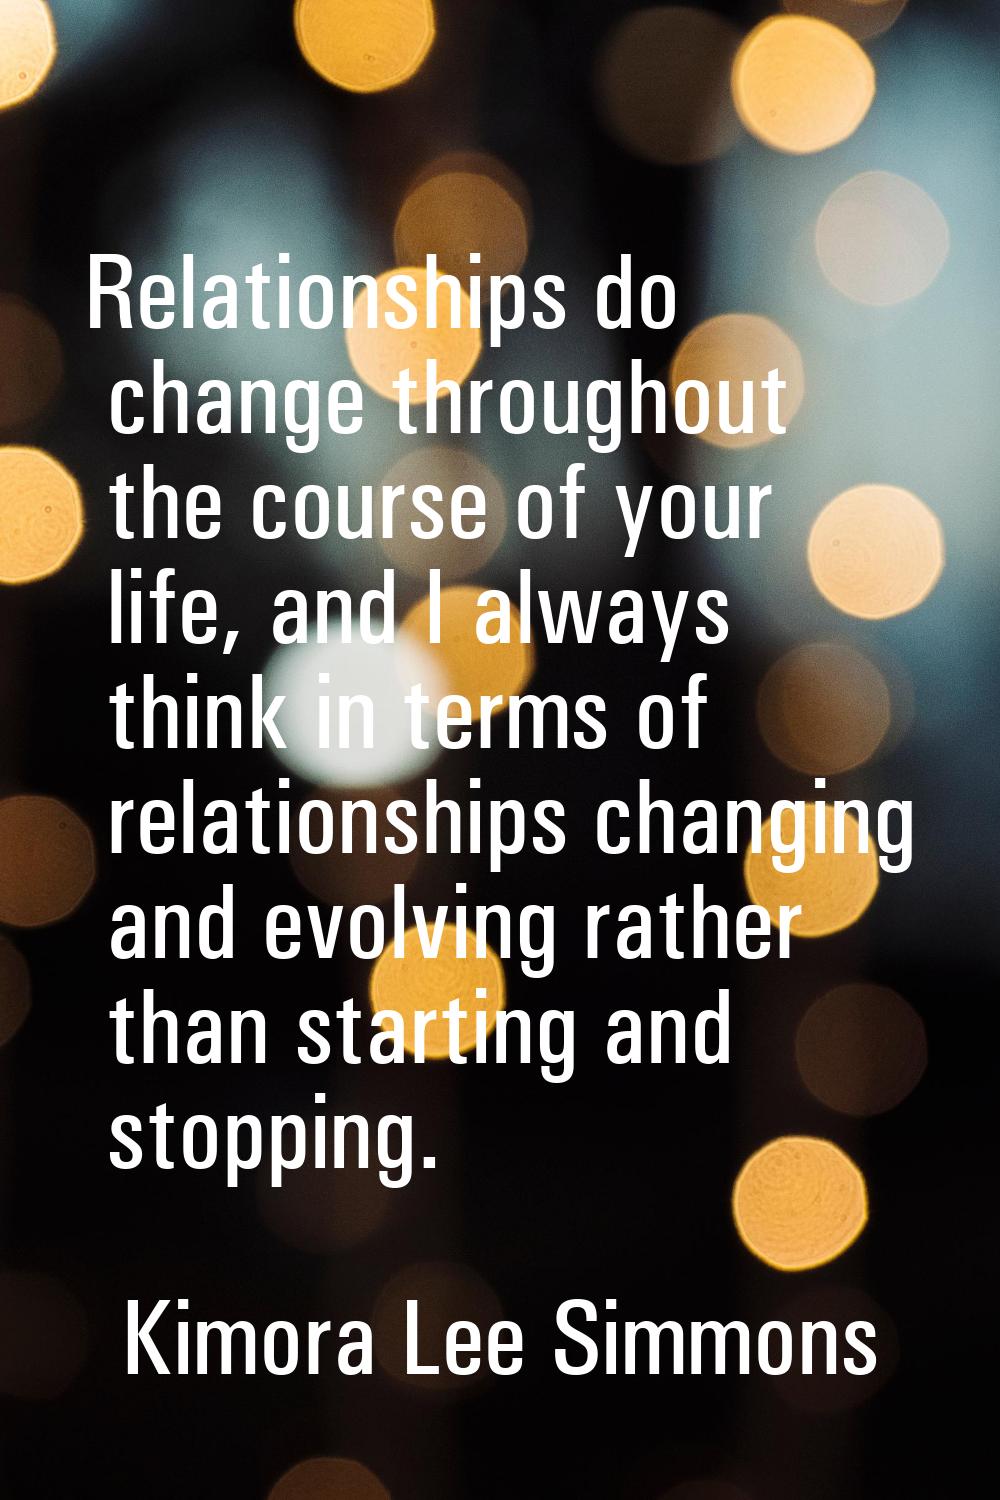 Relationships do change throughout the course of your life, and I always think in terms of relation